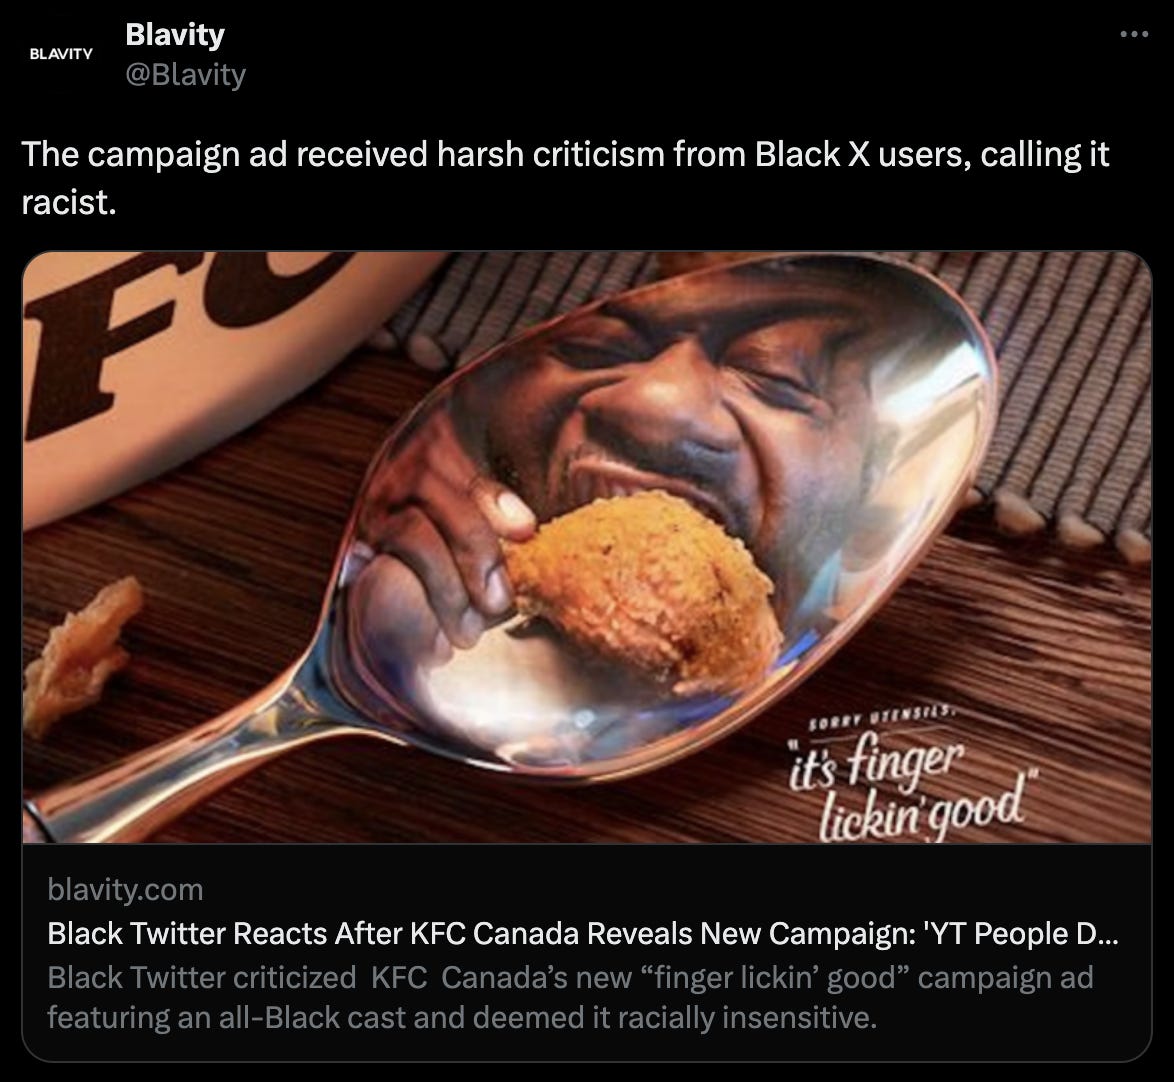 Screenshot of Blavity's Twitter account showing the offending KFC Canada's "finger lickin' good" marketing campaign